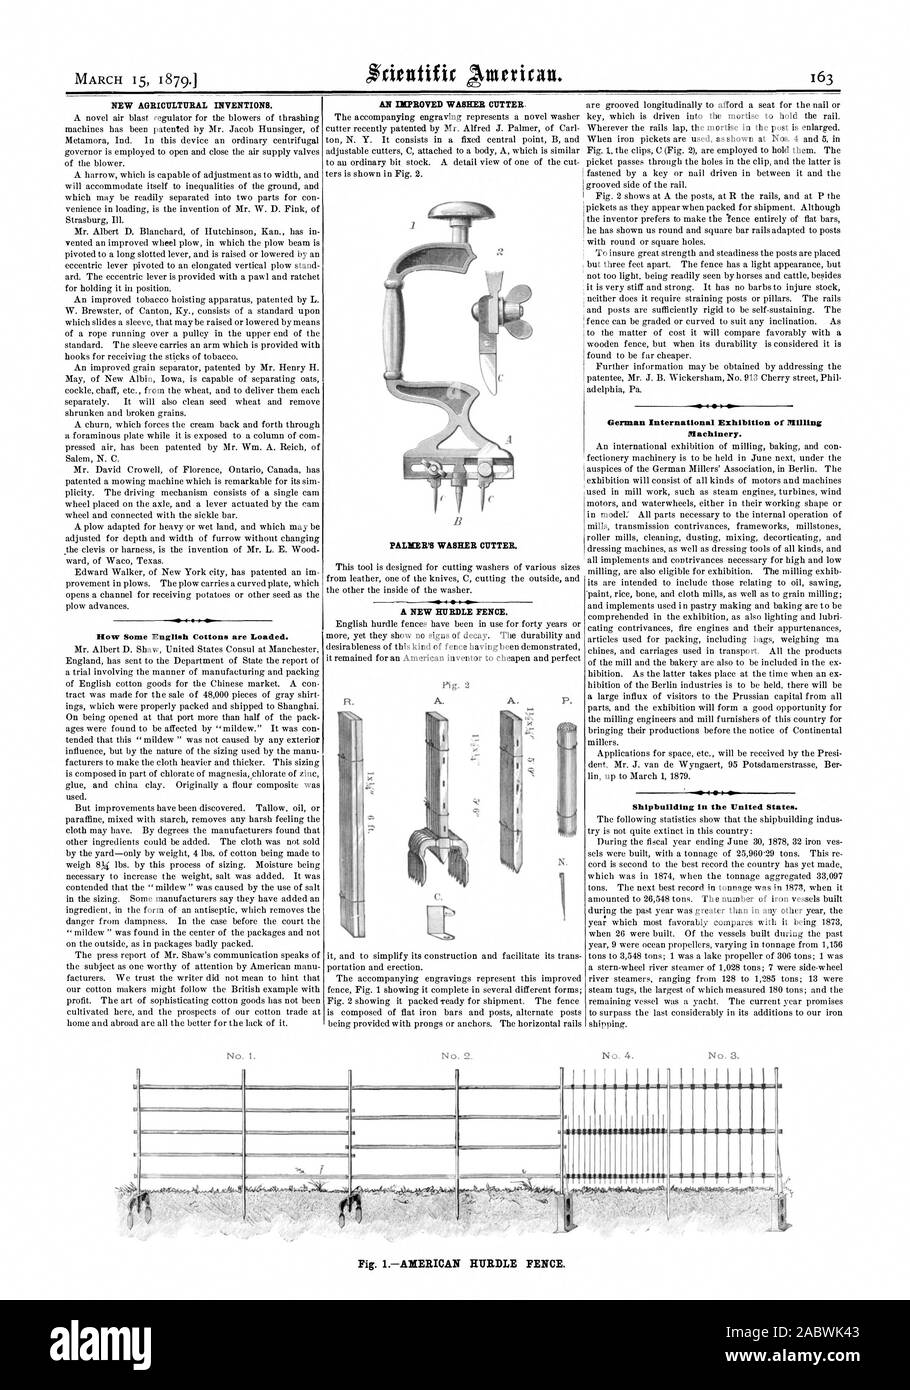 MARCH 15 18791 NEW AGRICULTURAL INVENTIONS. Mow Some English Cottons are Loaded. AN IMPROVED WASHER CUTTER. A NEW HURDLE FENCE. I V German International Exhibition of Milling Machinery. Shipbuilding in the United States. I PALMER'S WASHER CUTTER a eminimilmalMI MININEME S j a Fig. 1AMERICAN HURDLE FENCE., scientific american, 79-03-15 Stock Photo